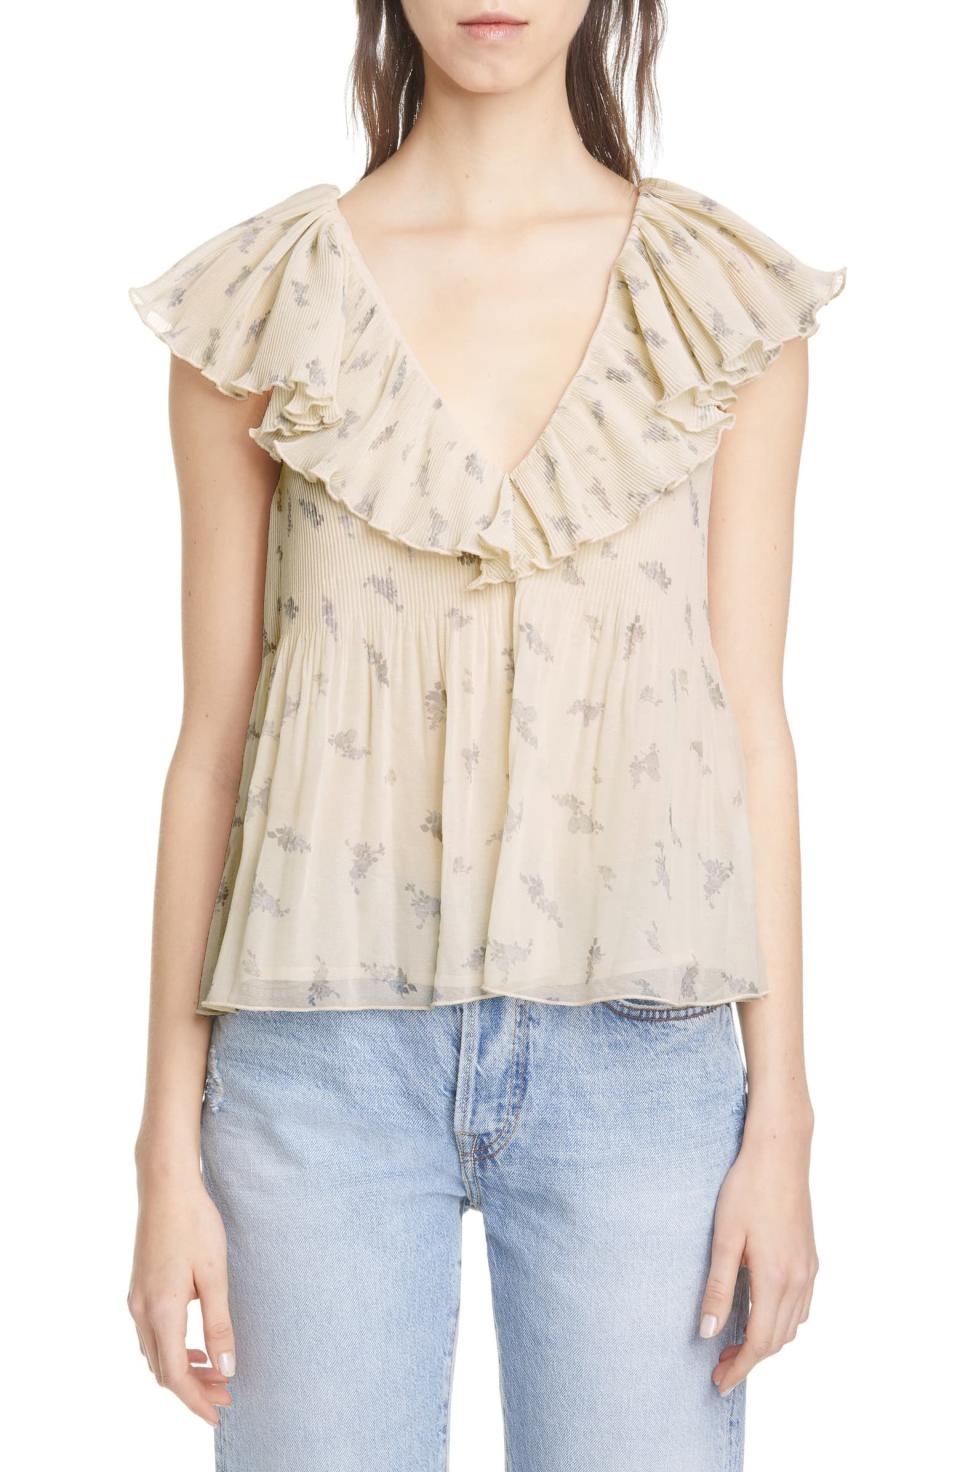 4) Floral Pleated Georgette Blouse